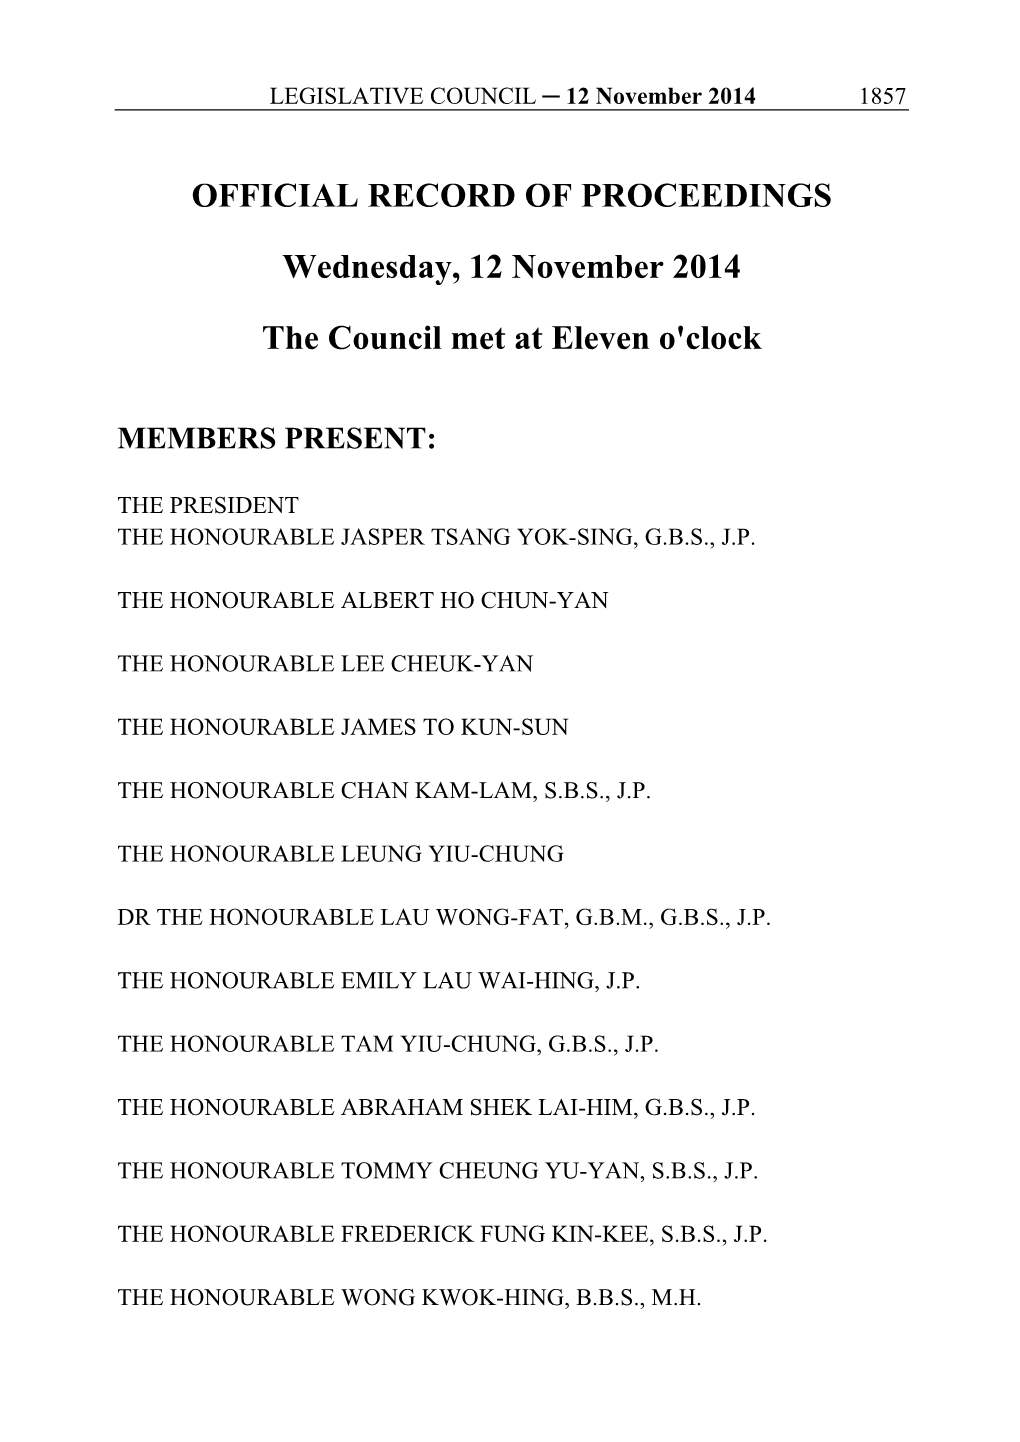 OFFICIAL RECORD of PROCEEDINGS Wednesday, 12